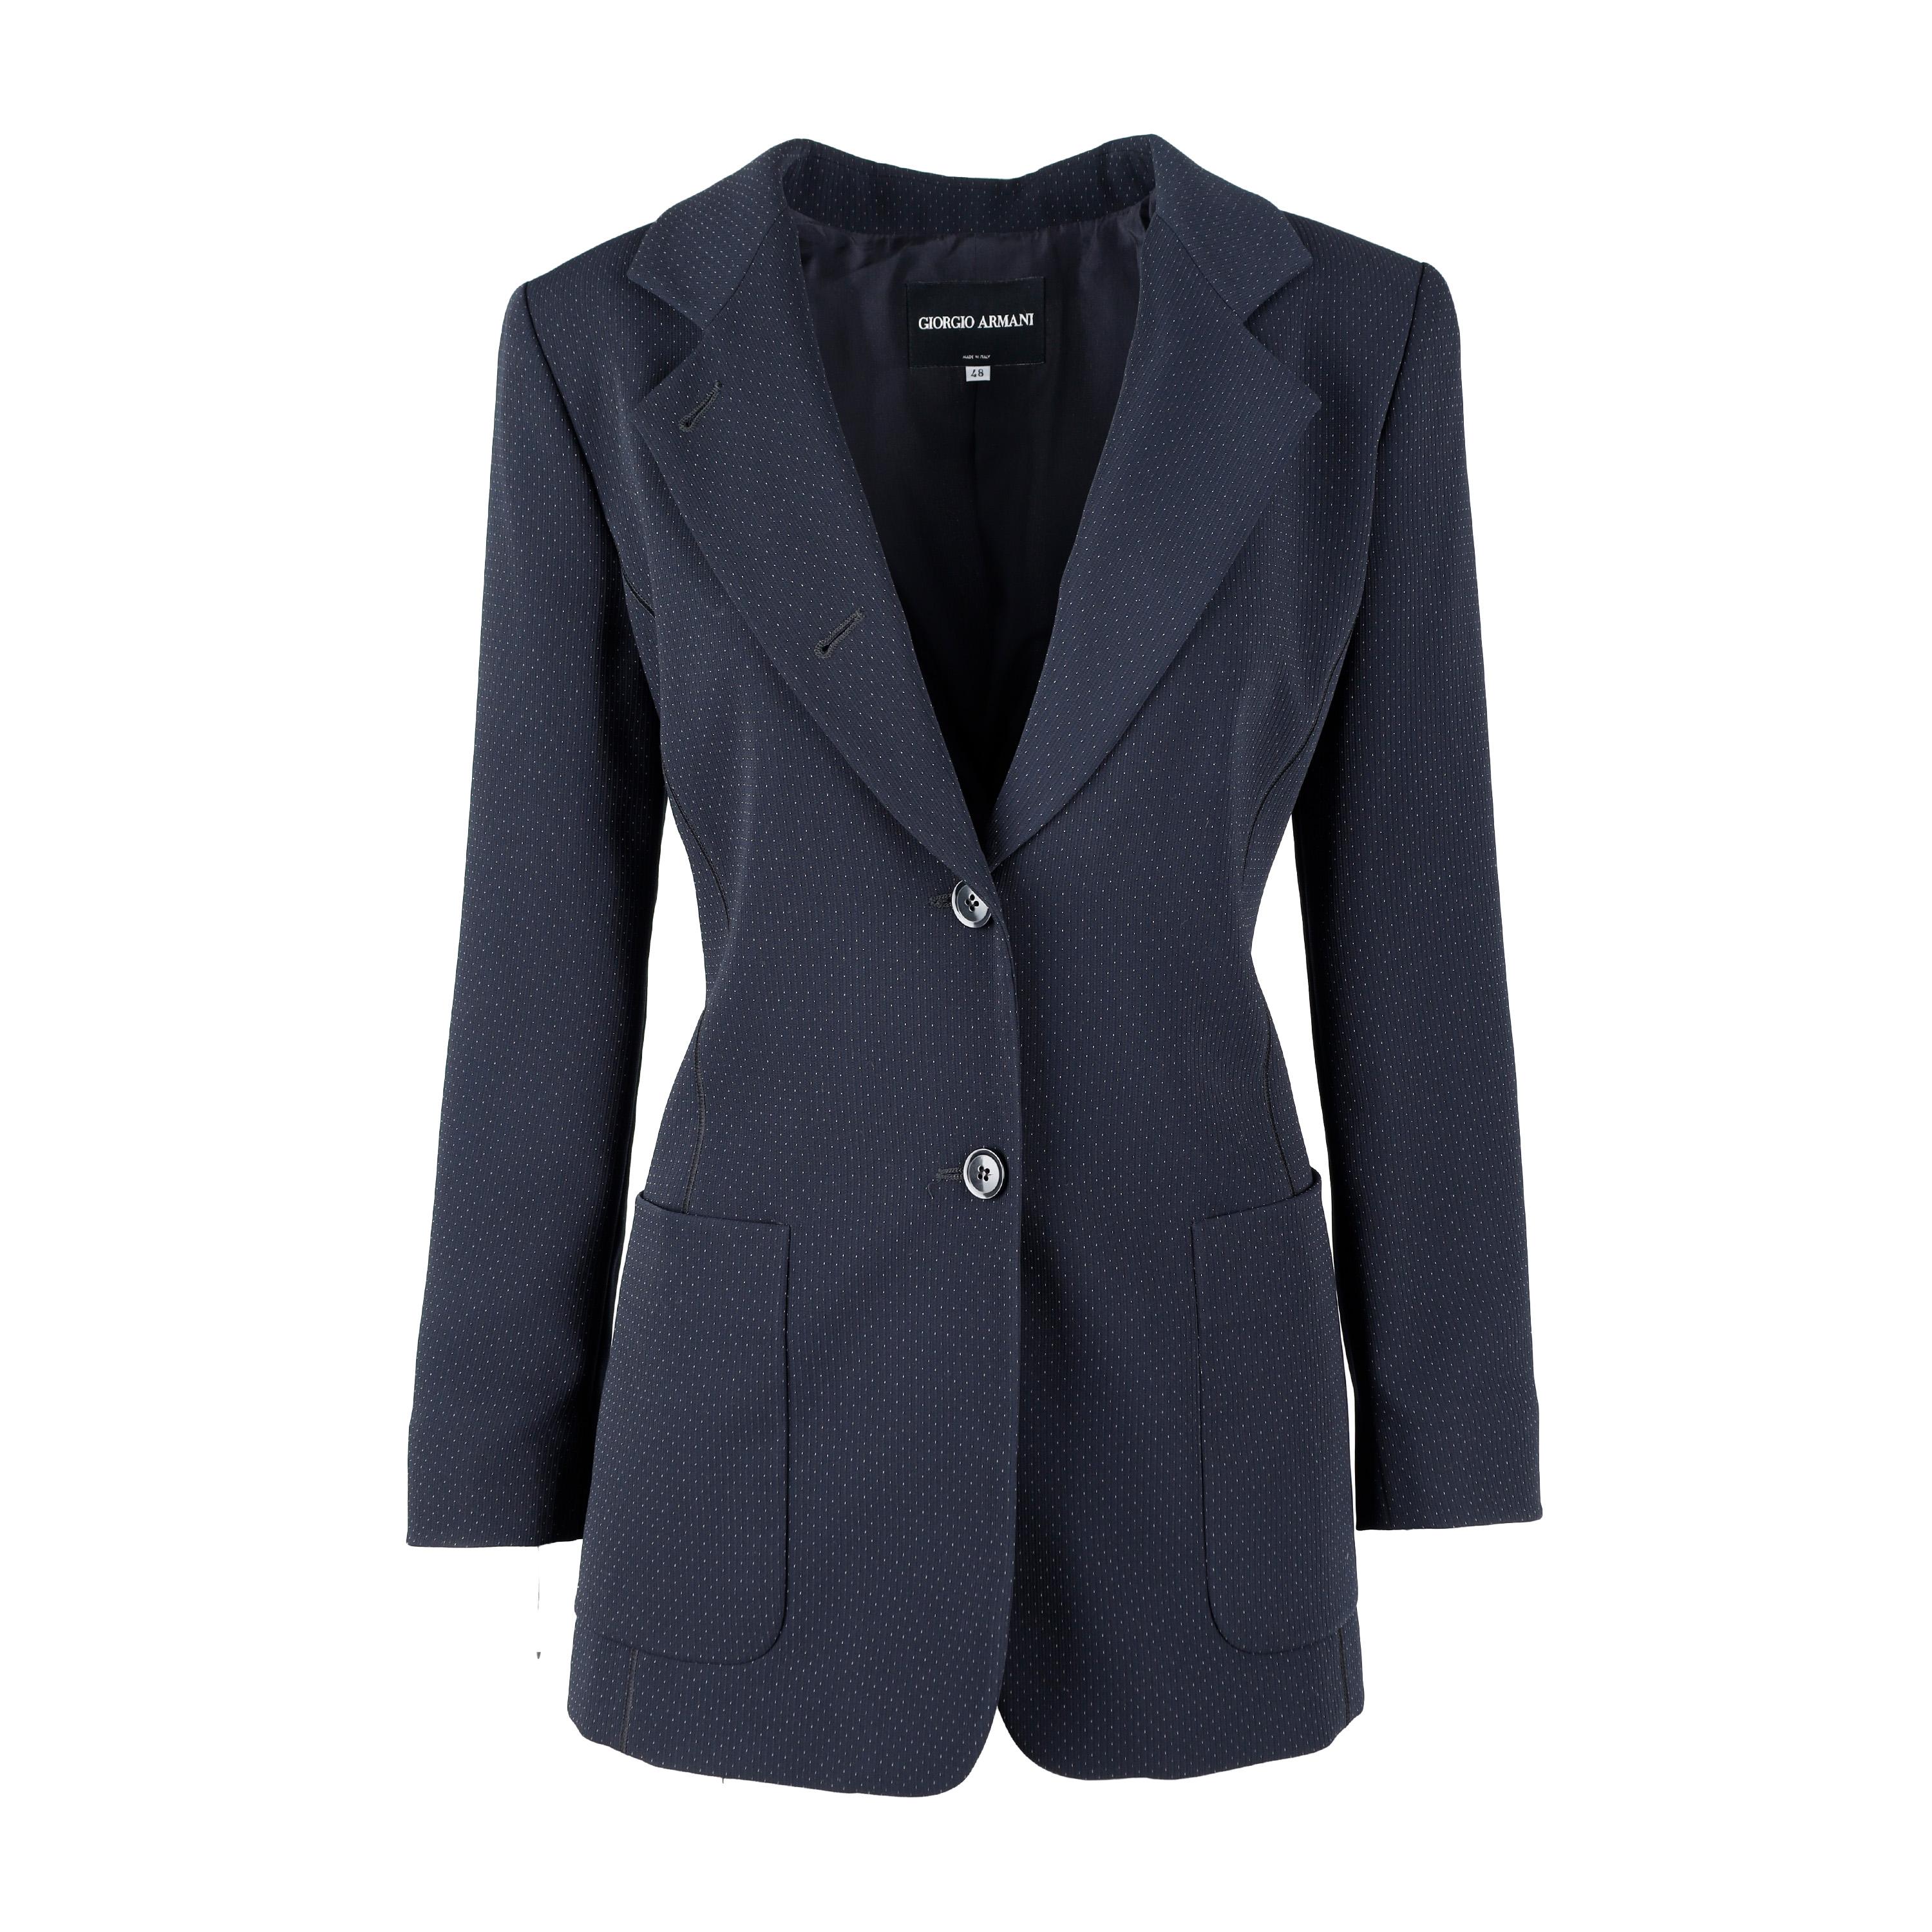 This Giorgio Armani Borgo 21 suit is an ideal choice for any occasion. Crafted from dark navy blue material it features a two-button blazer with notched lapels and two patch pockets and tonal lining. The pants are loose-fitting, with a front